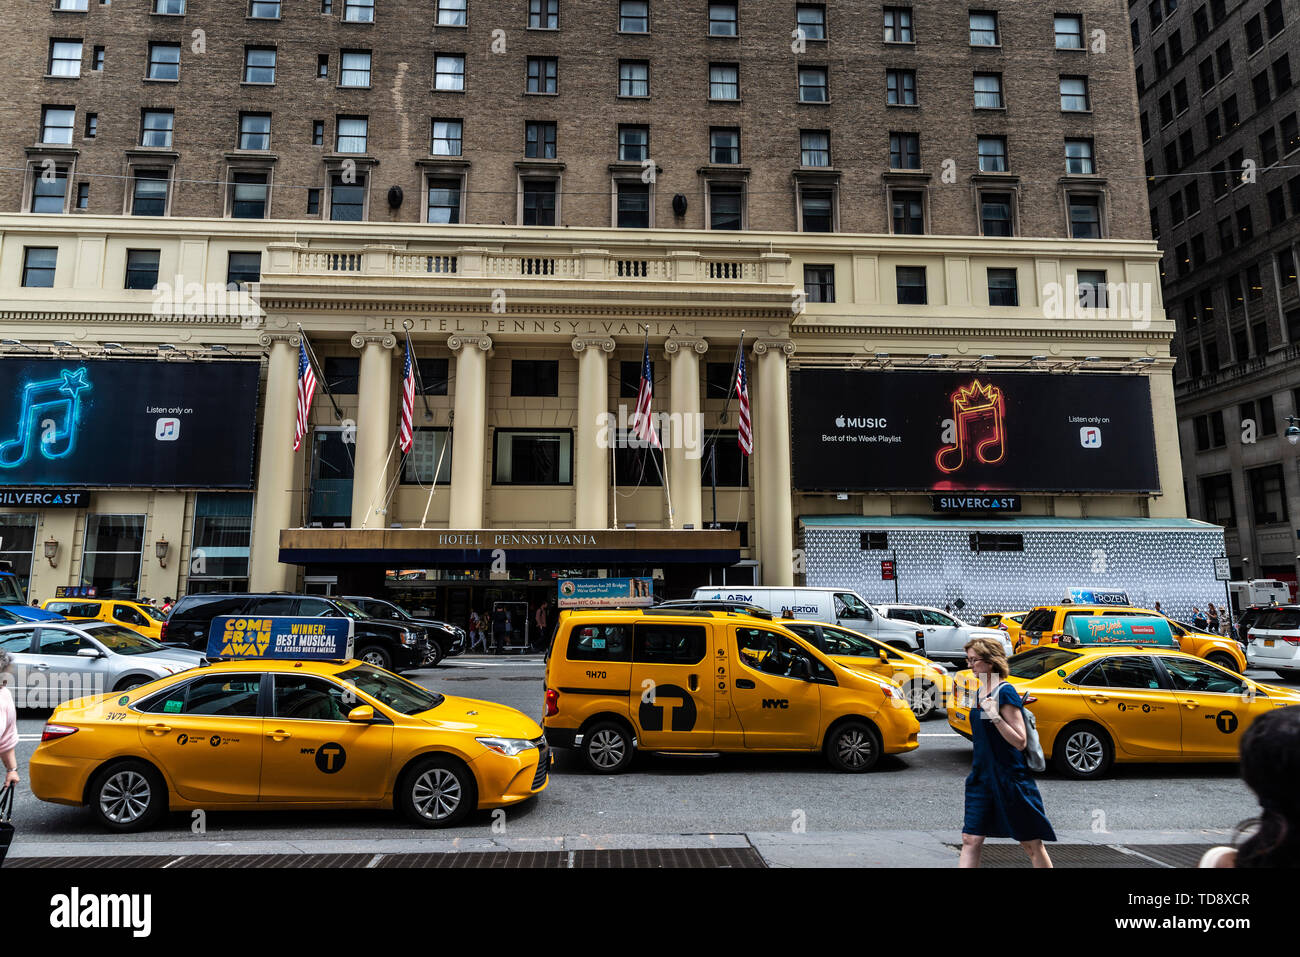 New York City, USA - July 31, 2018: Facade of the Pennsylvania Hotel, in front of the Madison Square Garden and Penn Station with traffic and people a Stock Photo